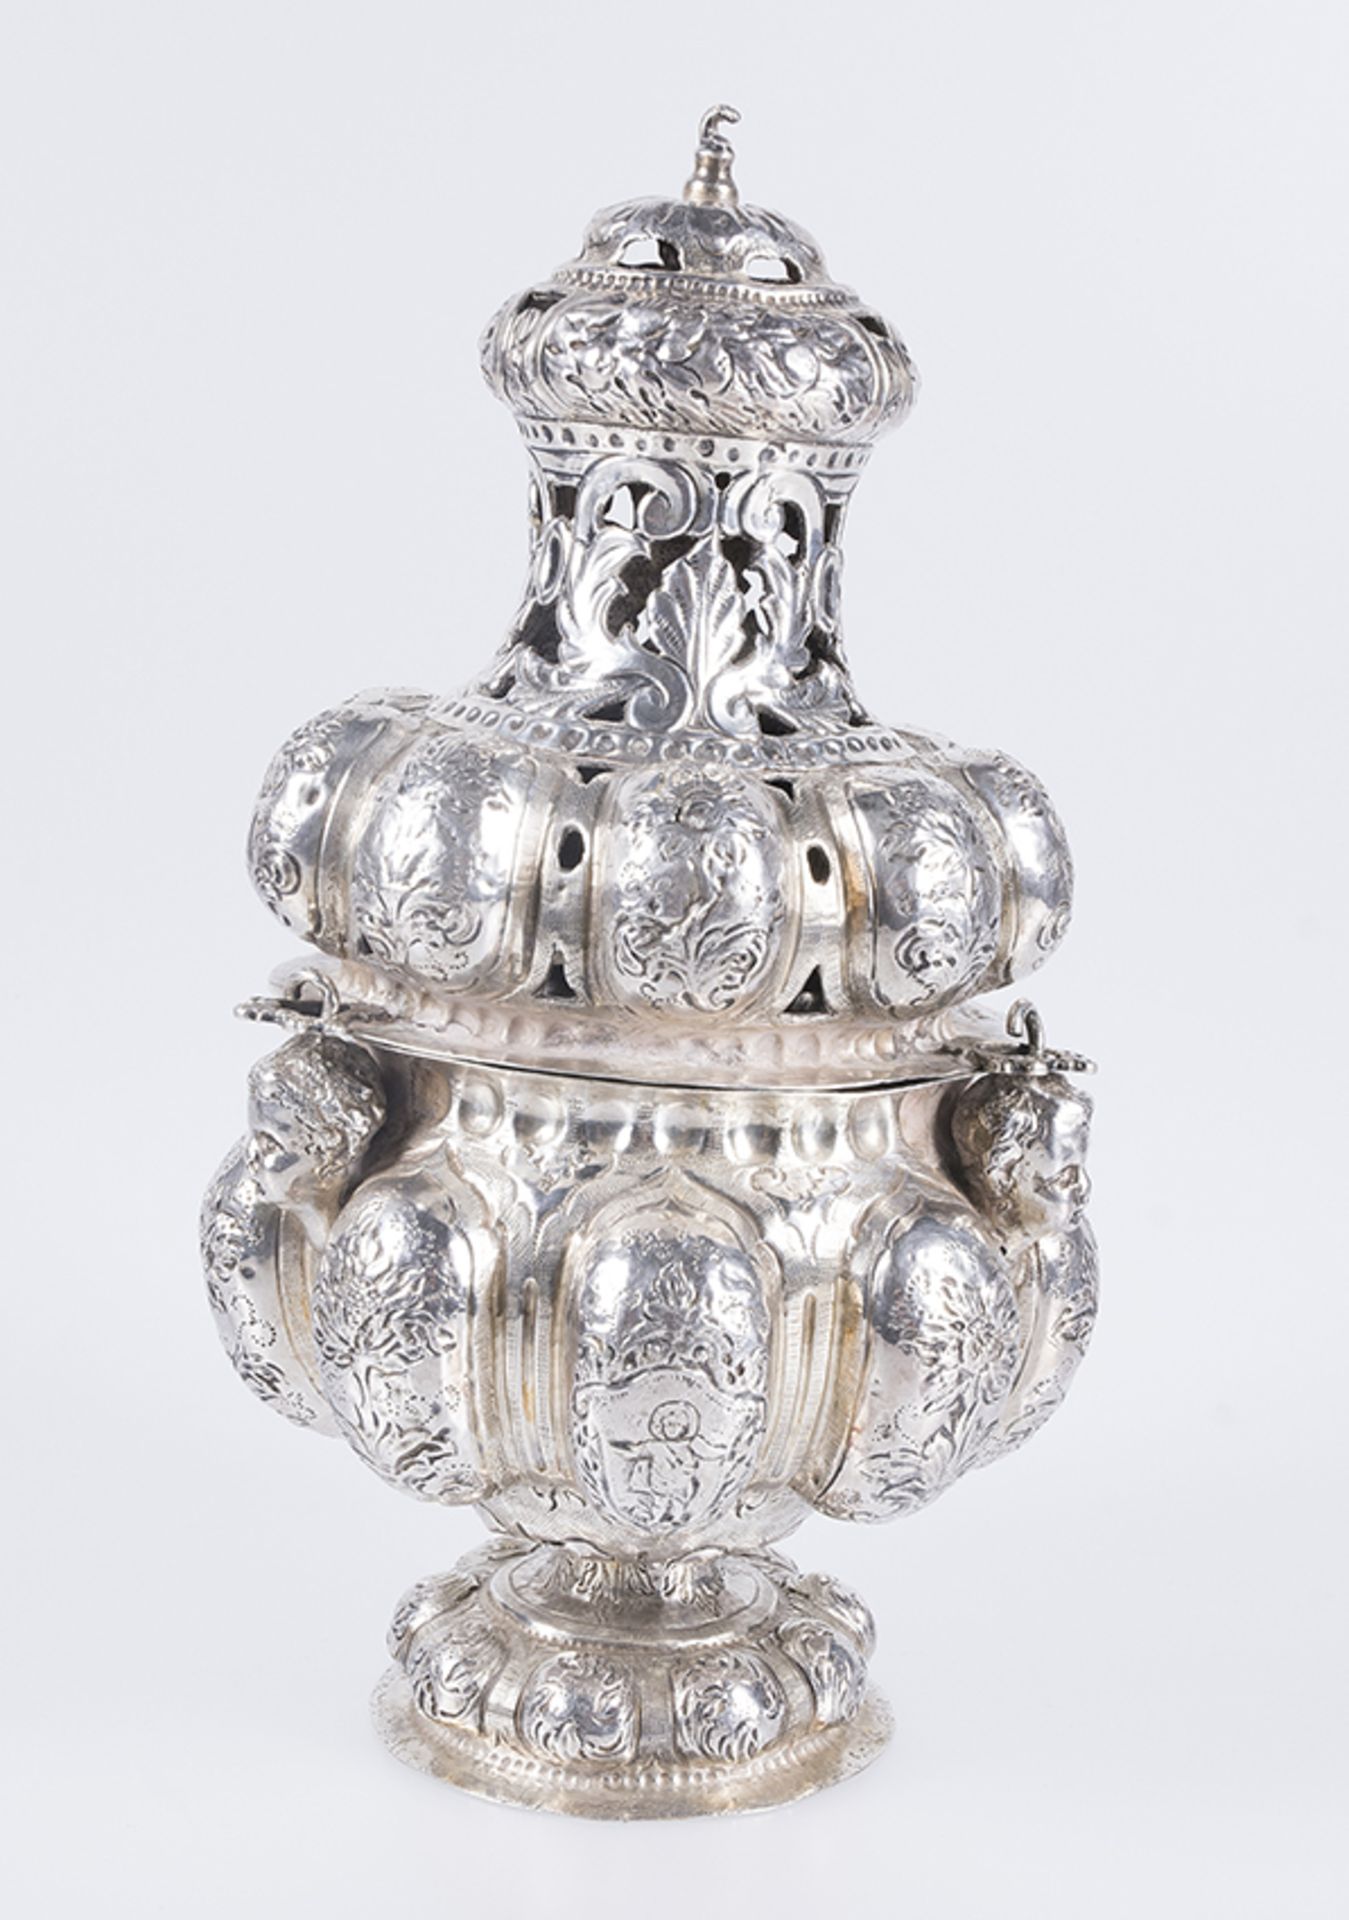 Large openwork, embossed and chiselled silver censer. 18th century. - Image 2 of 7